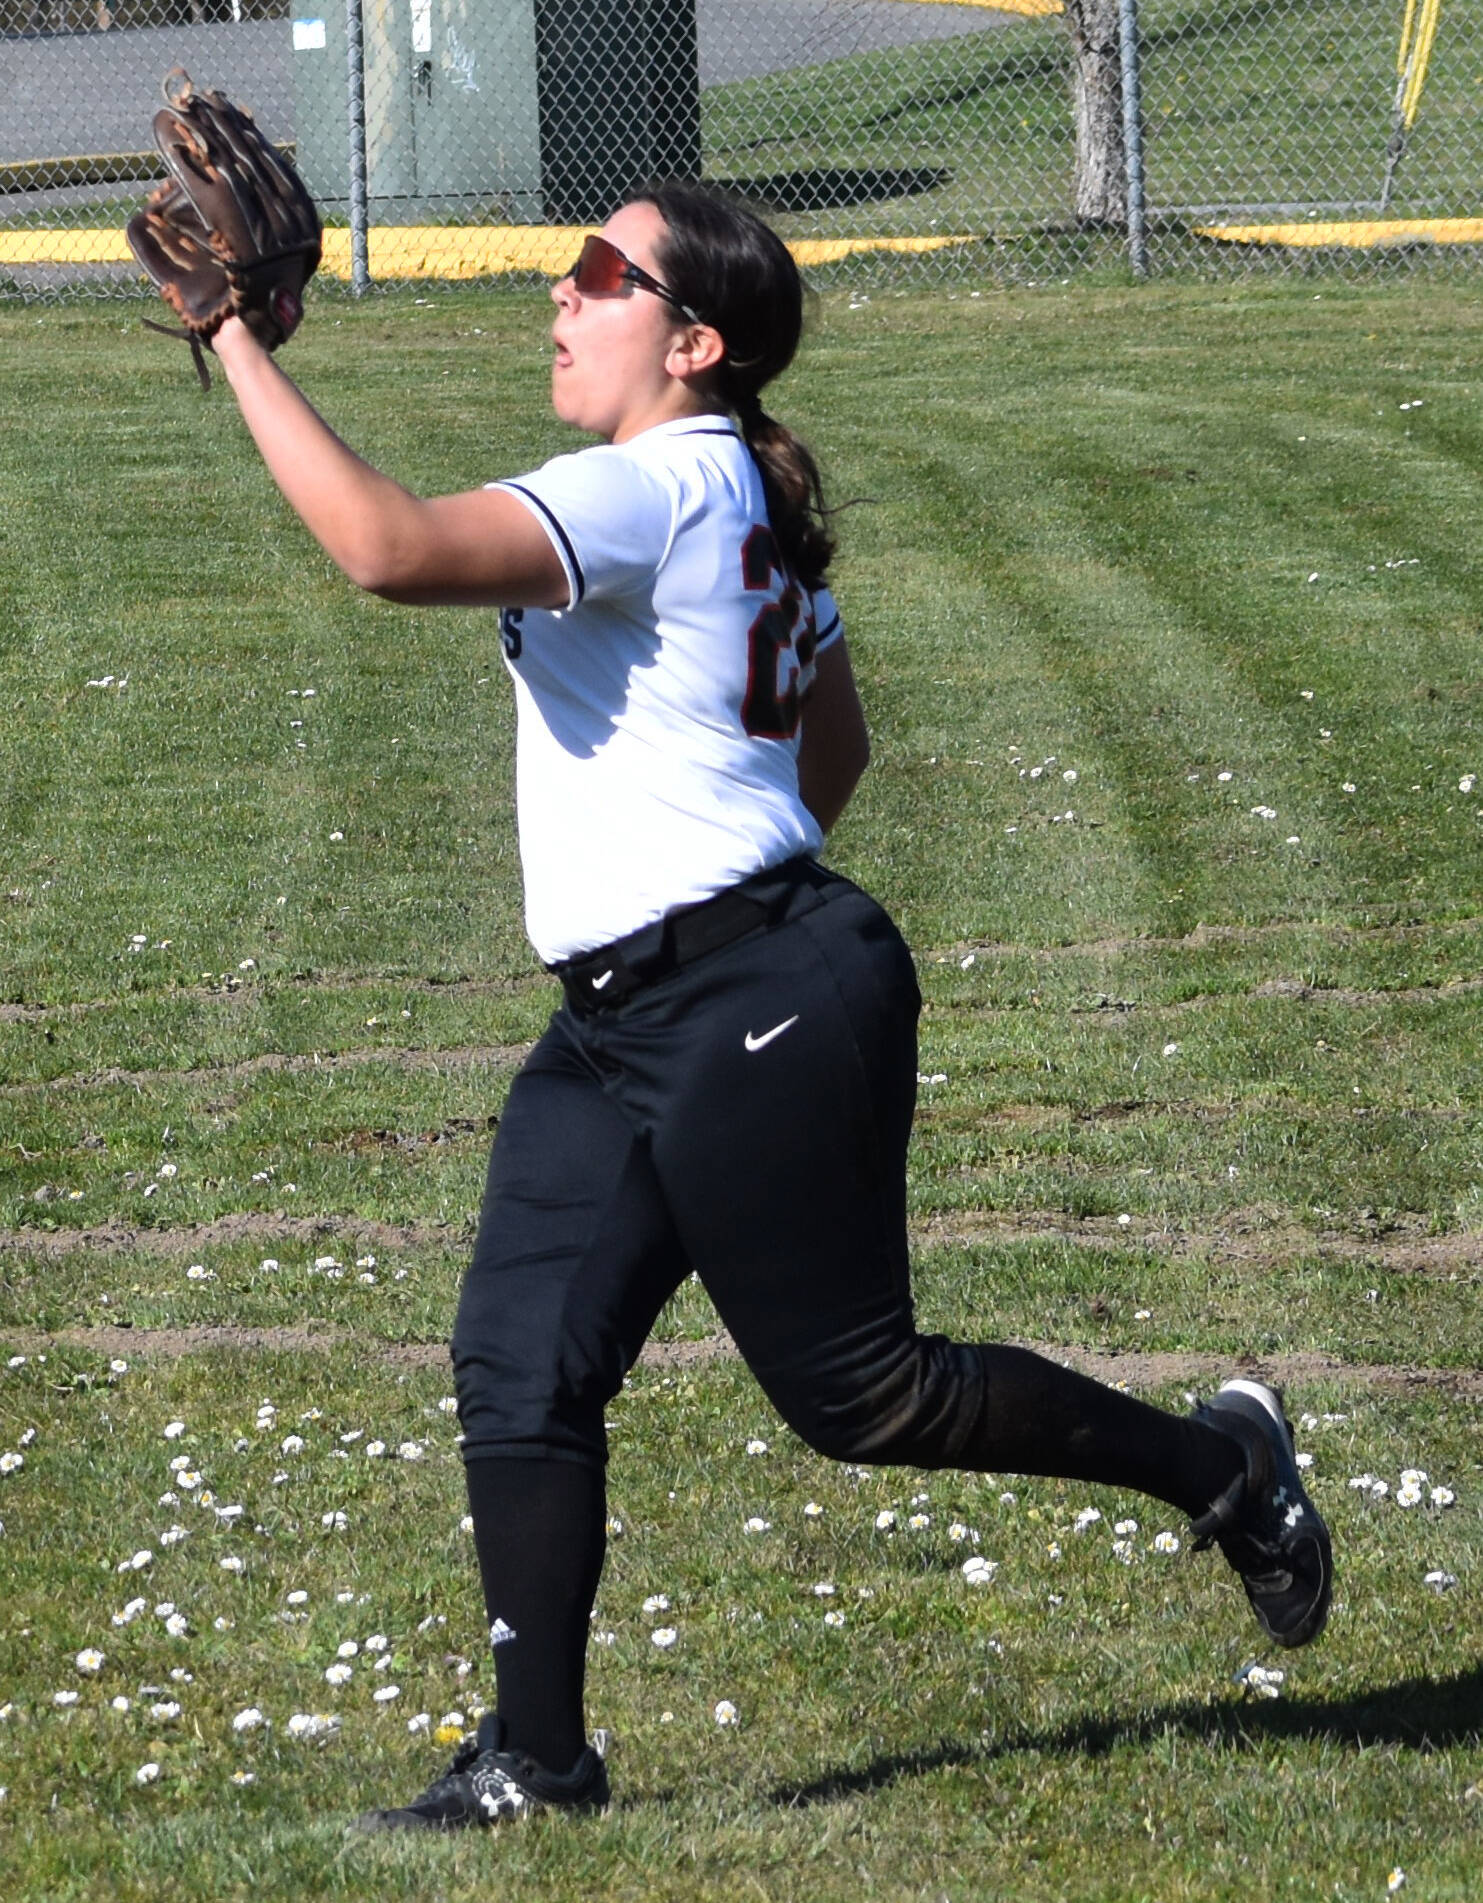 Josephine Castillo hopes her donation can help provide a great environment for the future of Kingston softball.